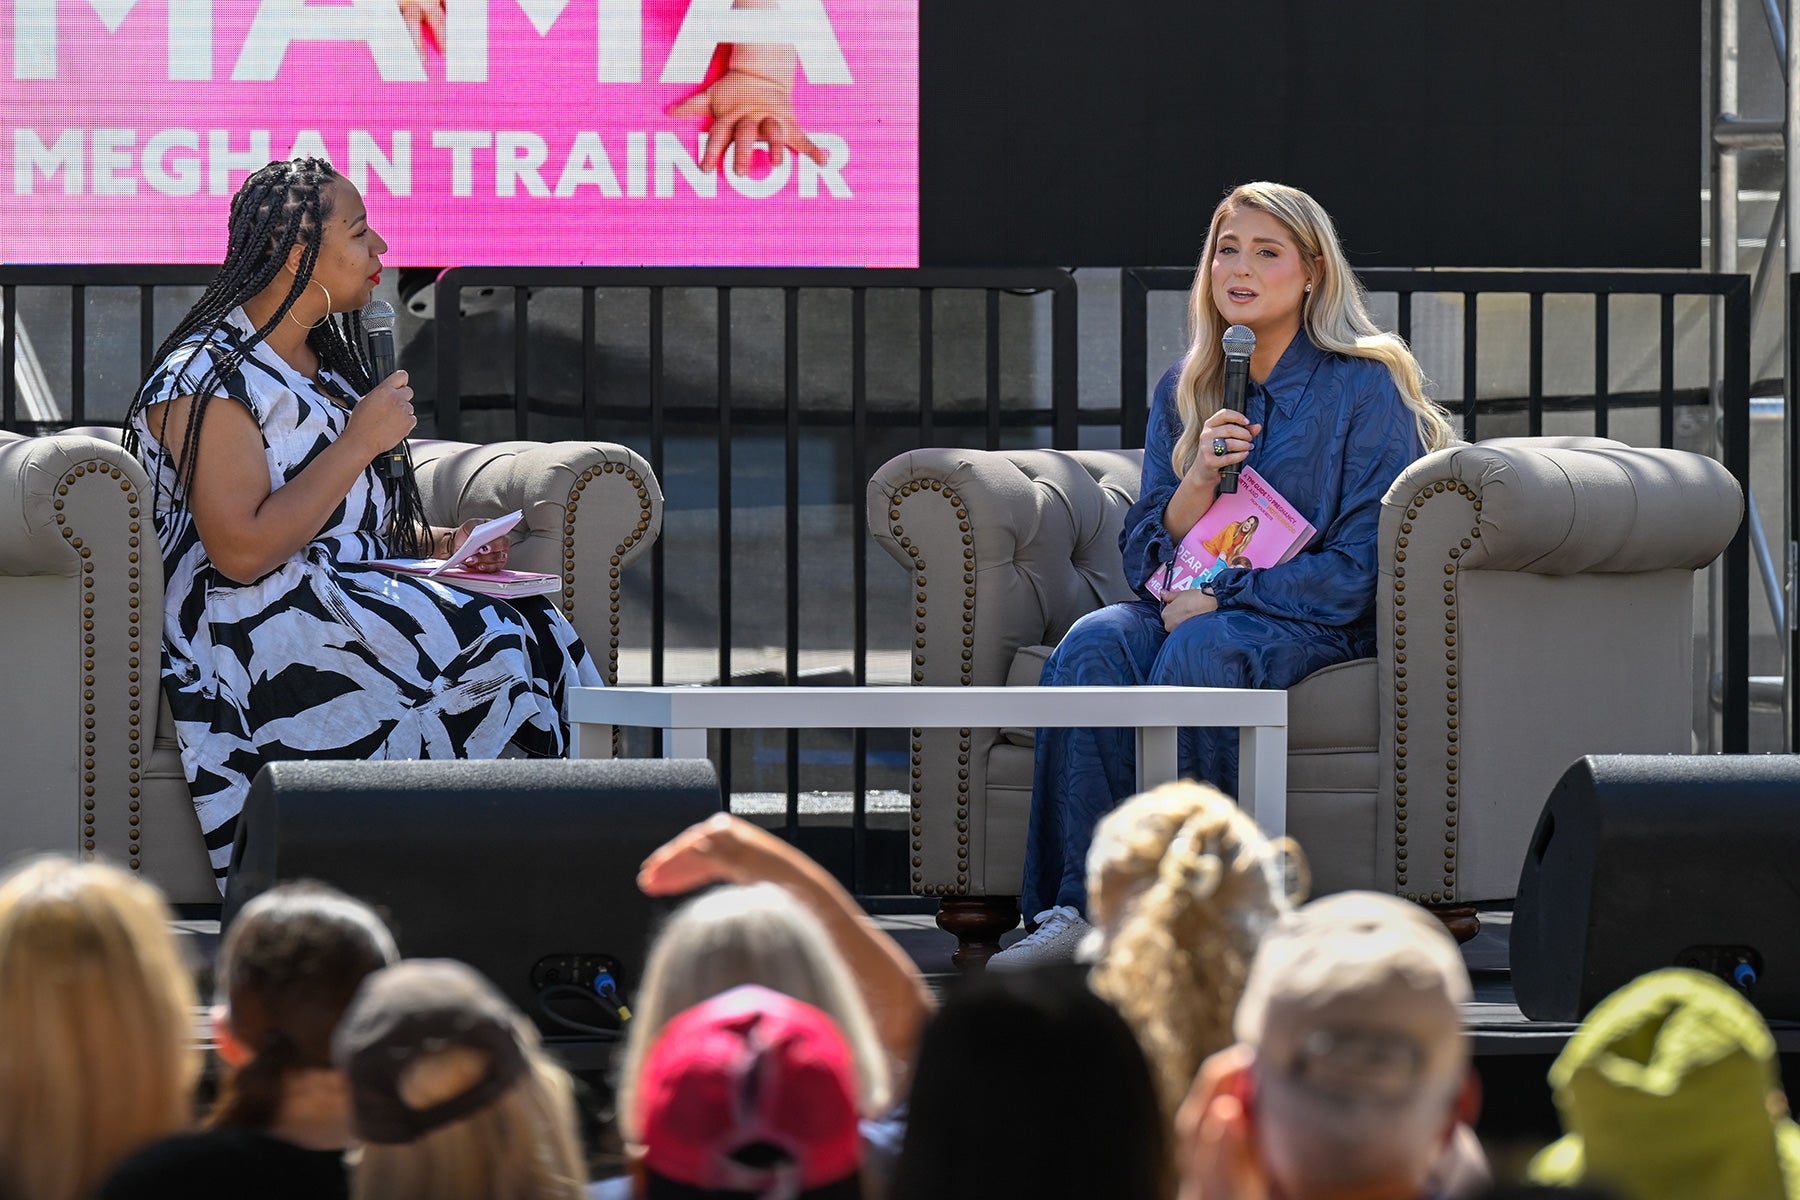 Los Angeles Times Festival of Books at USC: Meghan Traitor and Angel Jennings